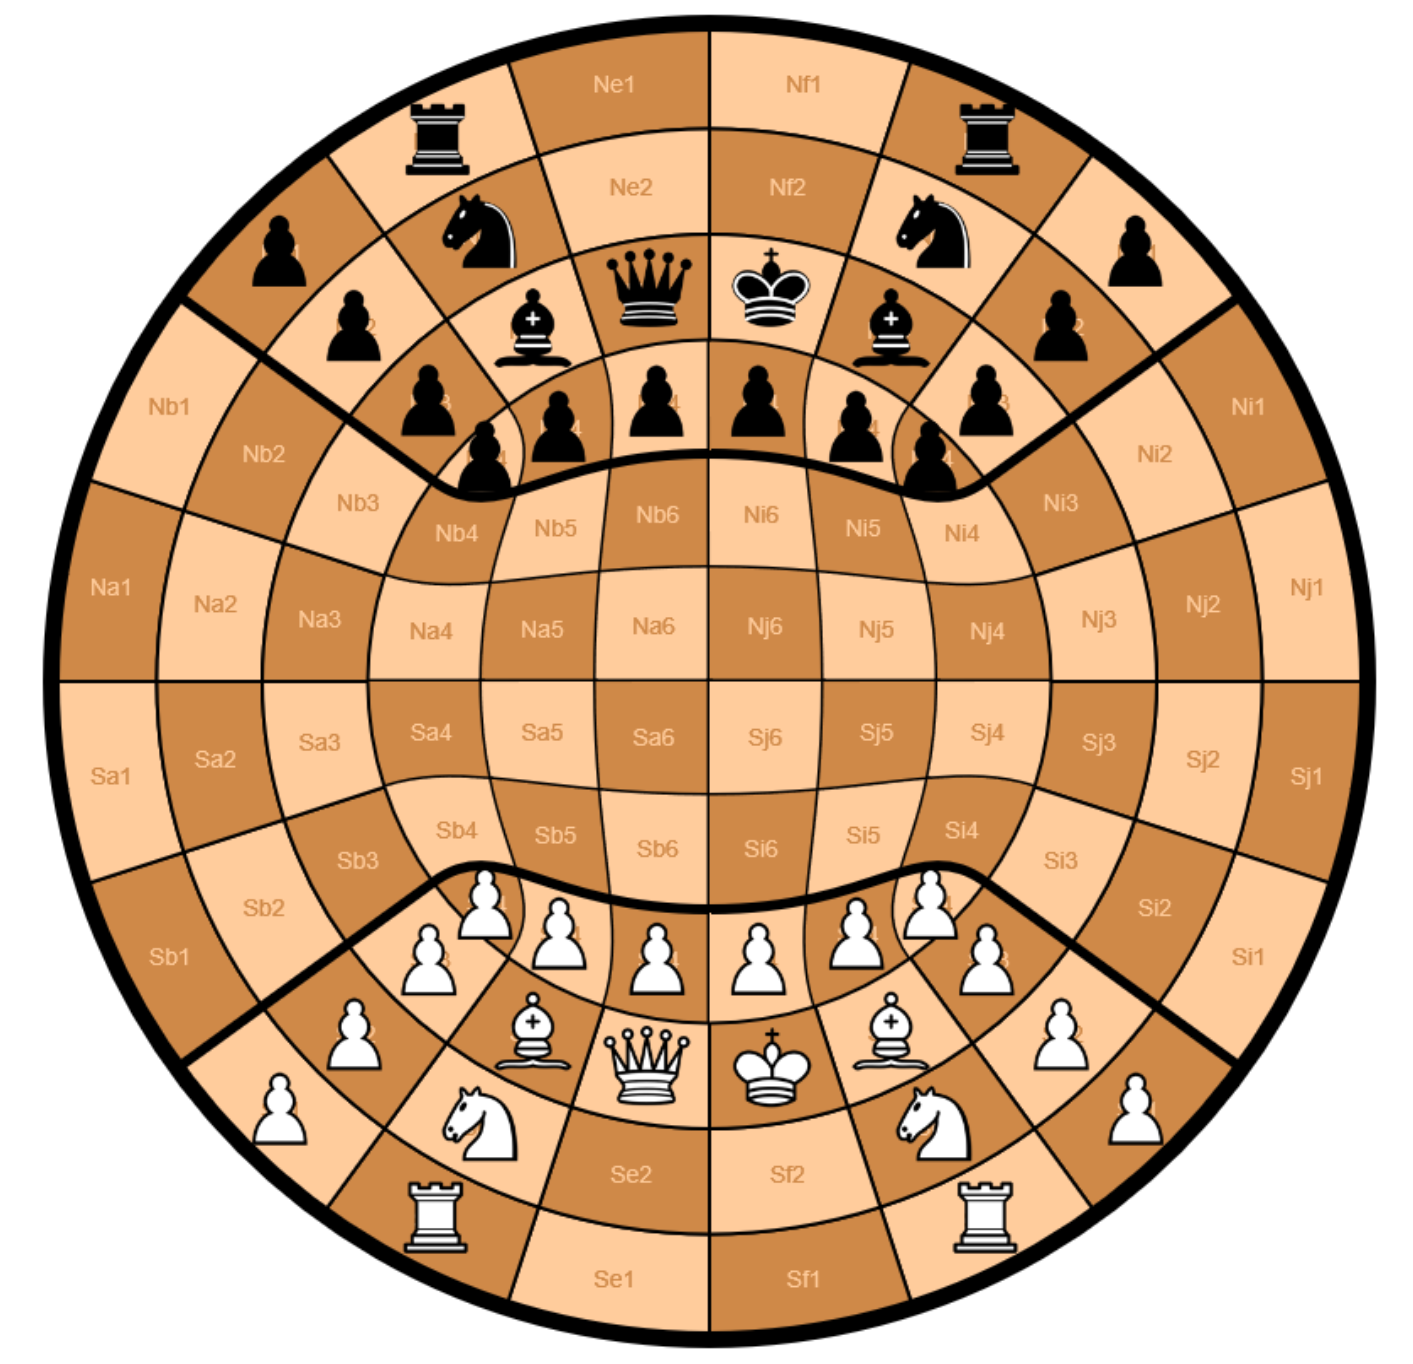 Chess Variants - Chess Terms 